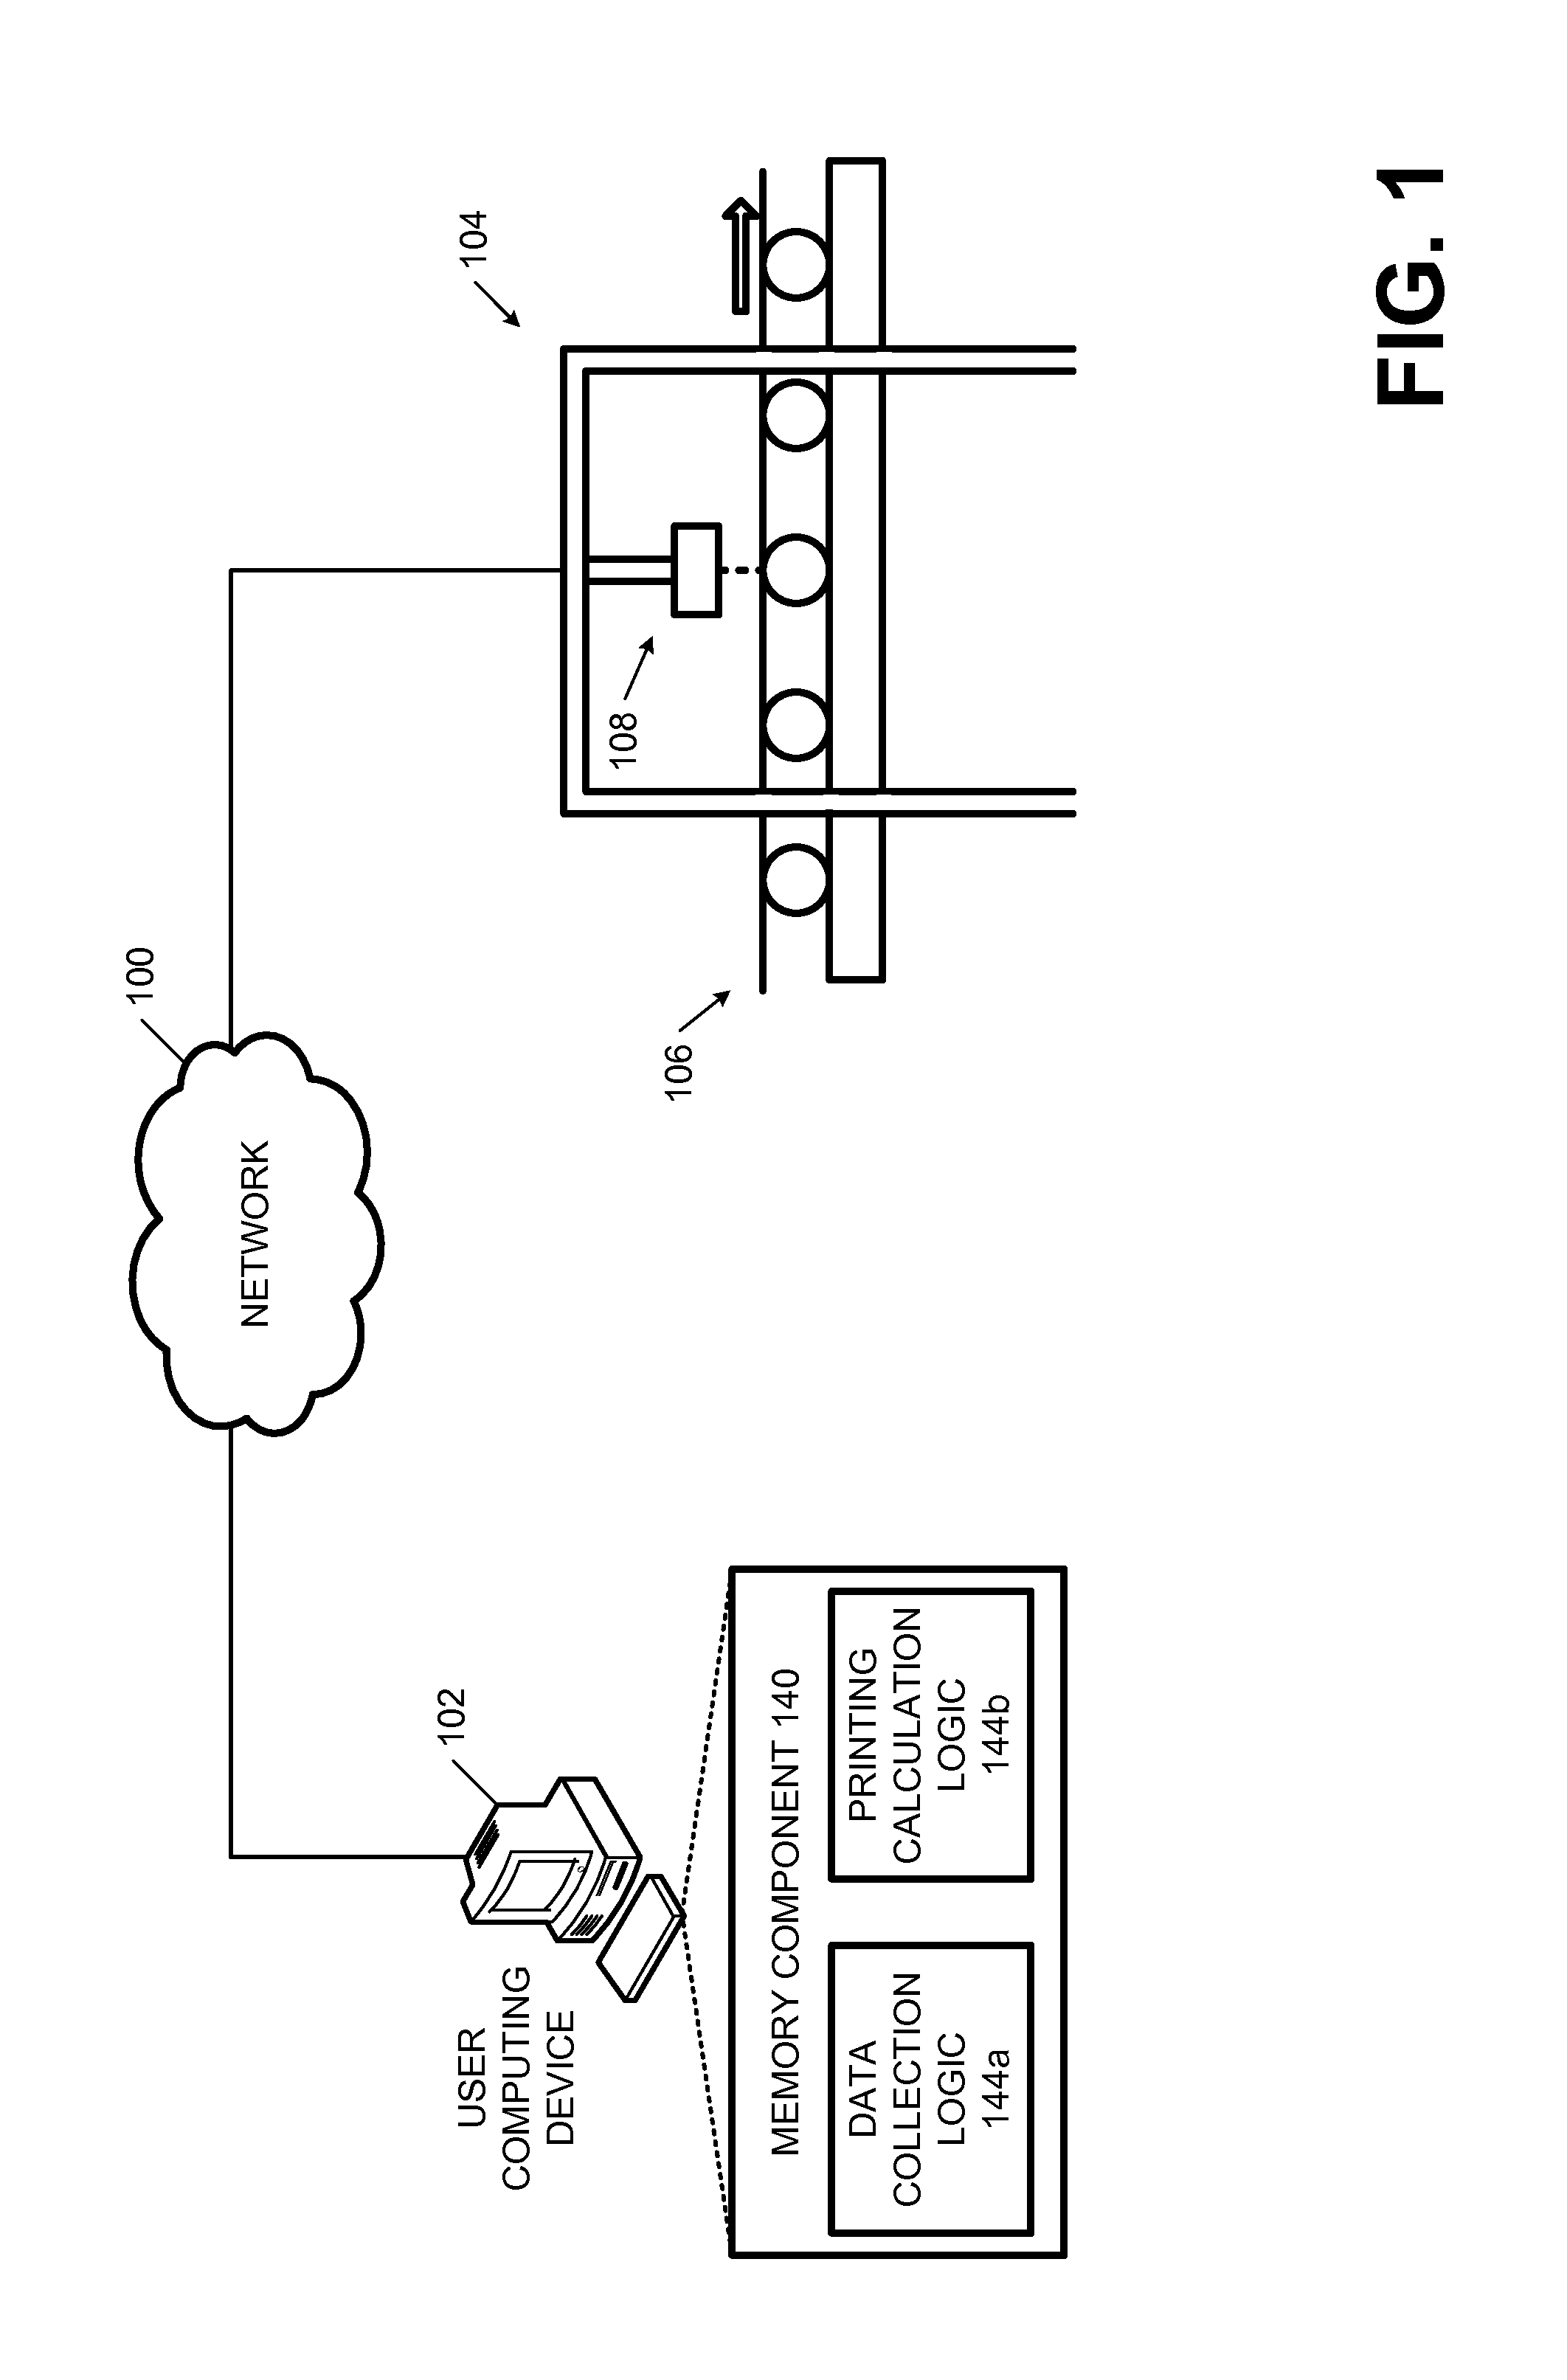 Systems and methods for image distortion reduction in web printing